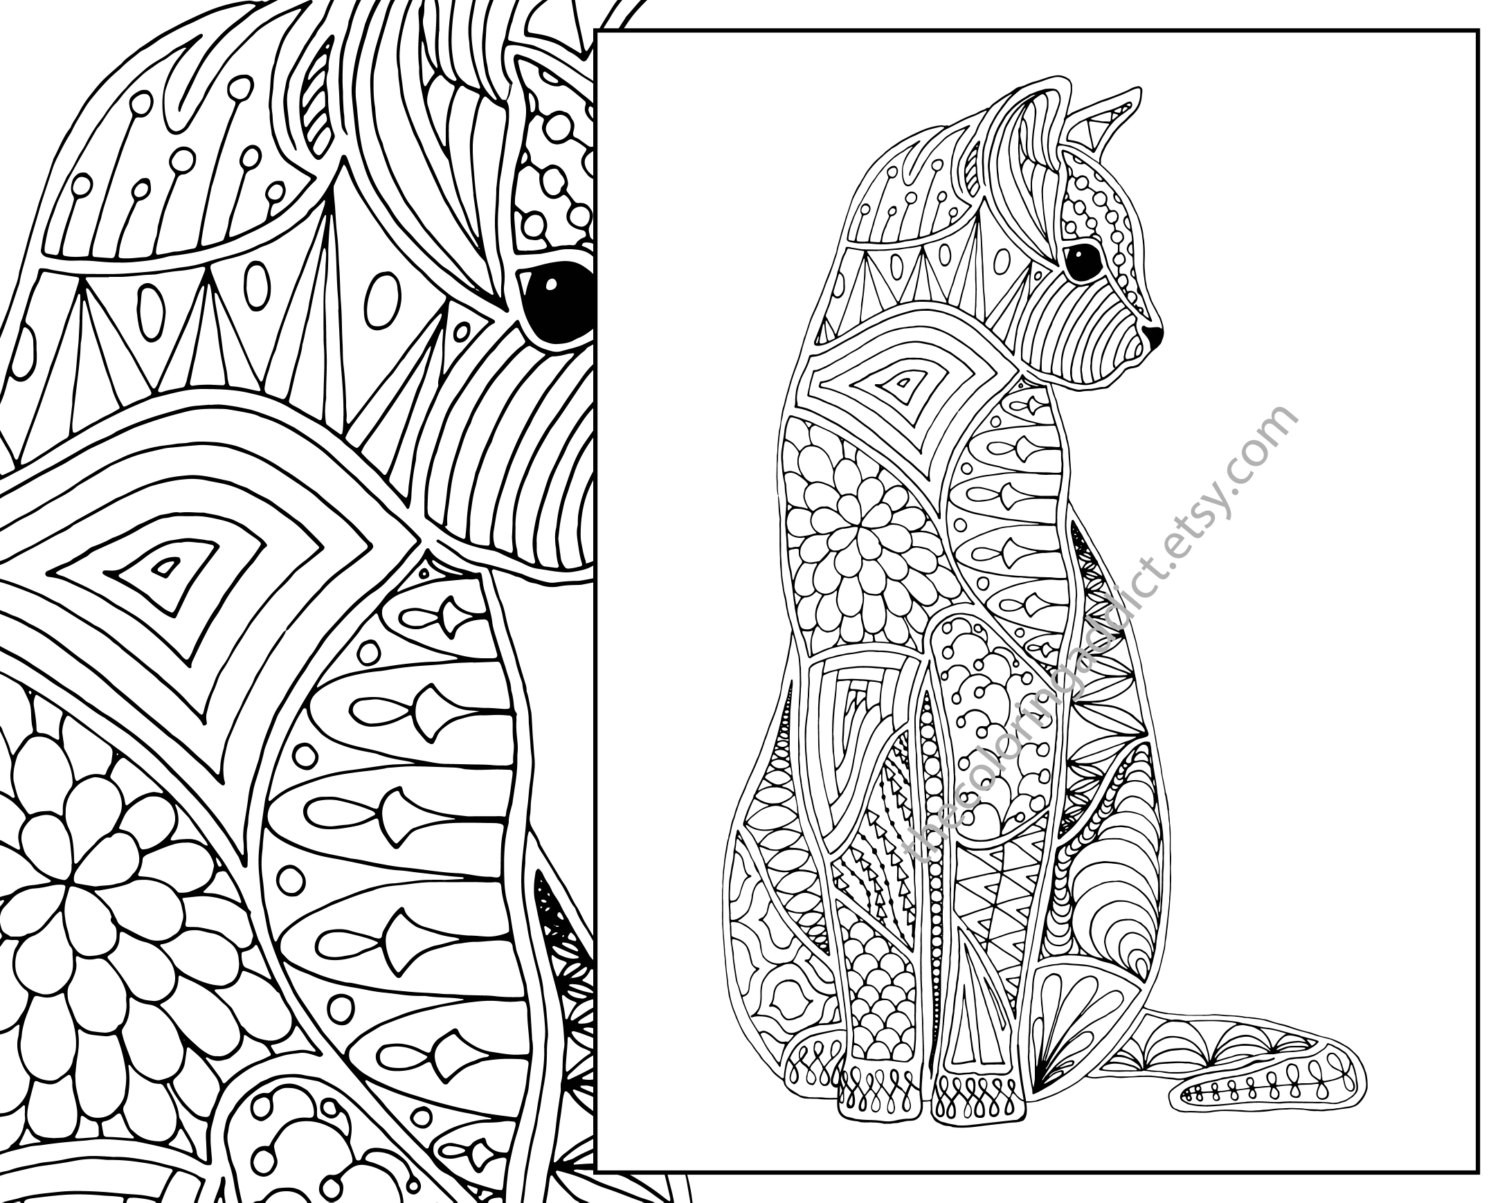 Coloring Pages For Adults Cats
 cat coloring page advanced coloring page adult coloring